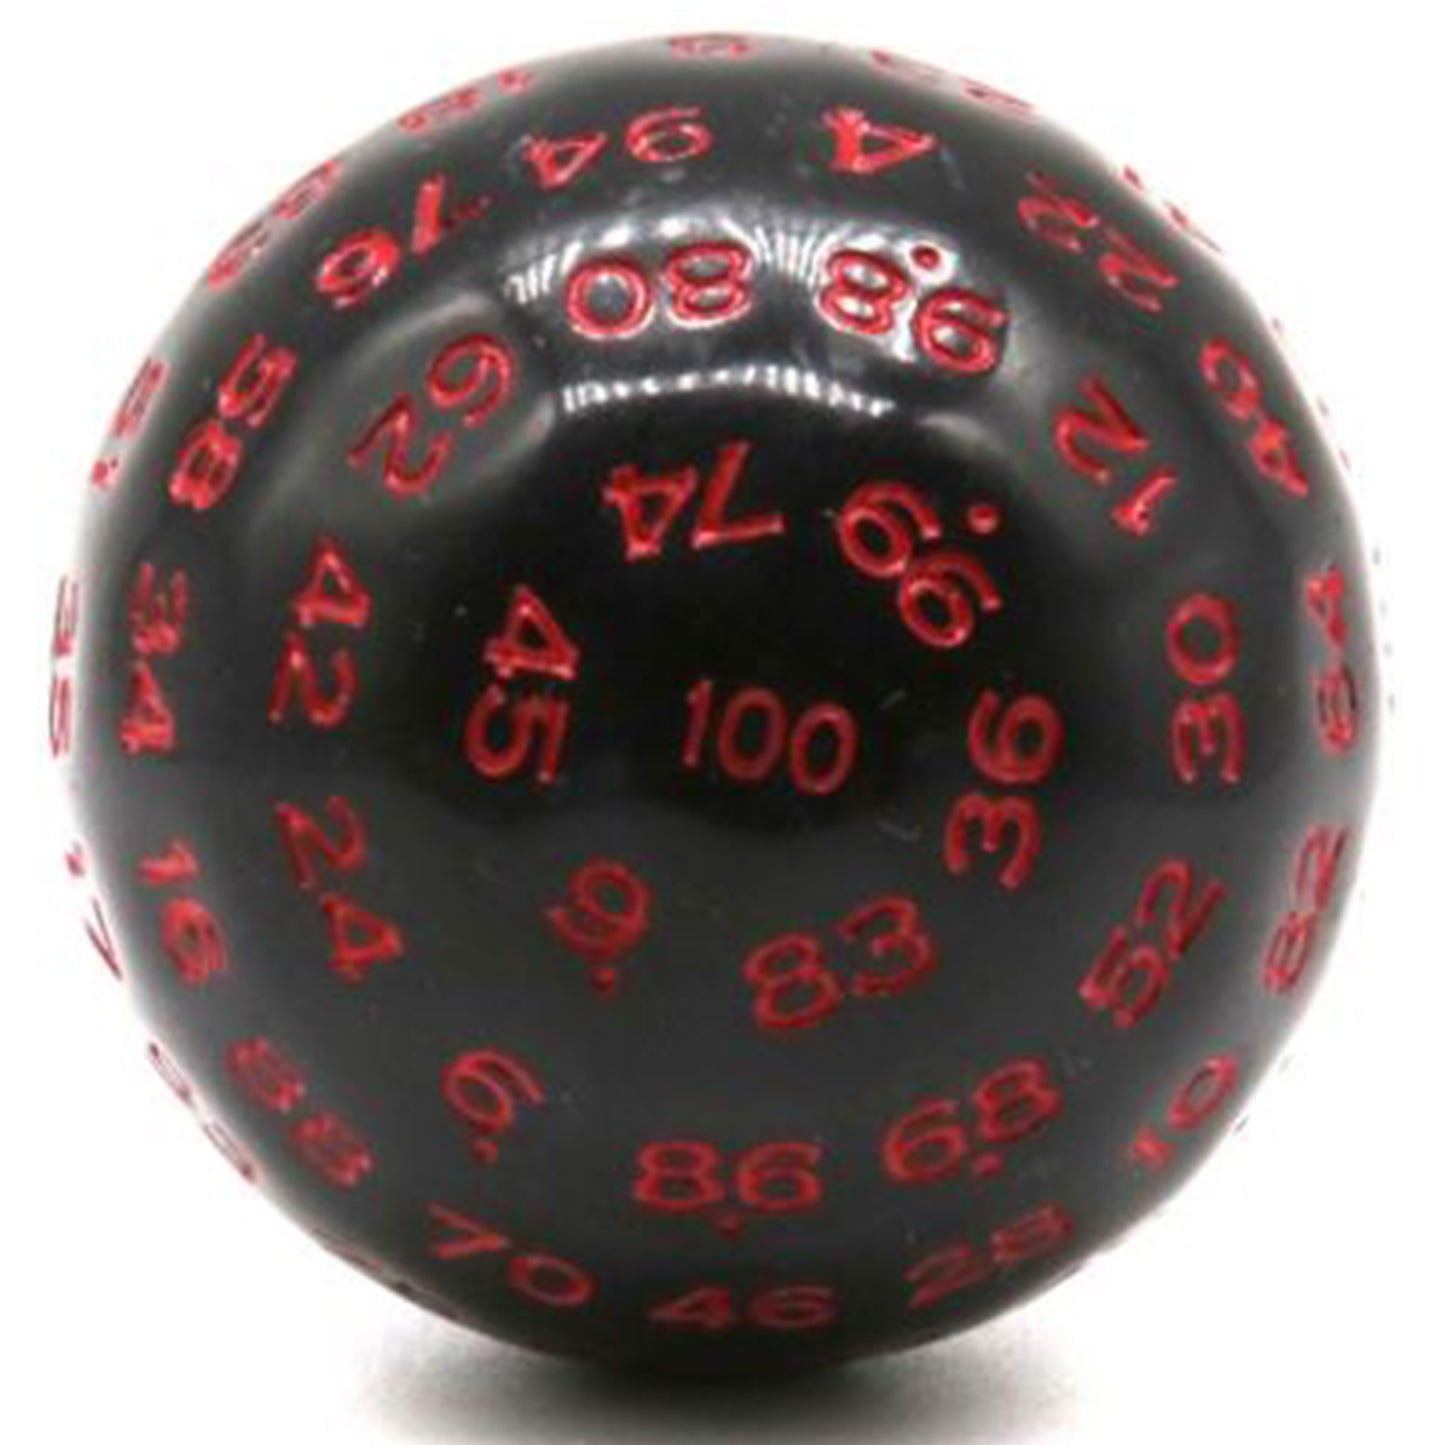 D100 One Hundred Sided Dice - Black with Red Numbers | Happy Piranha